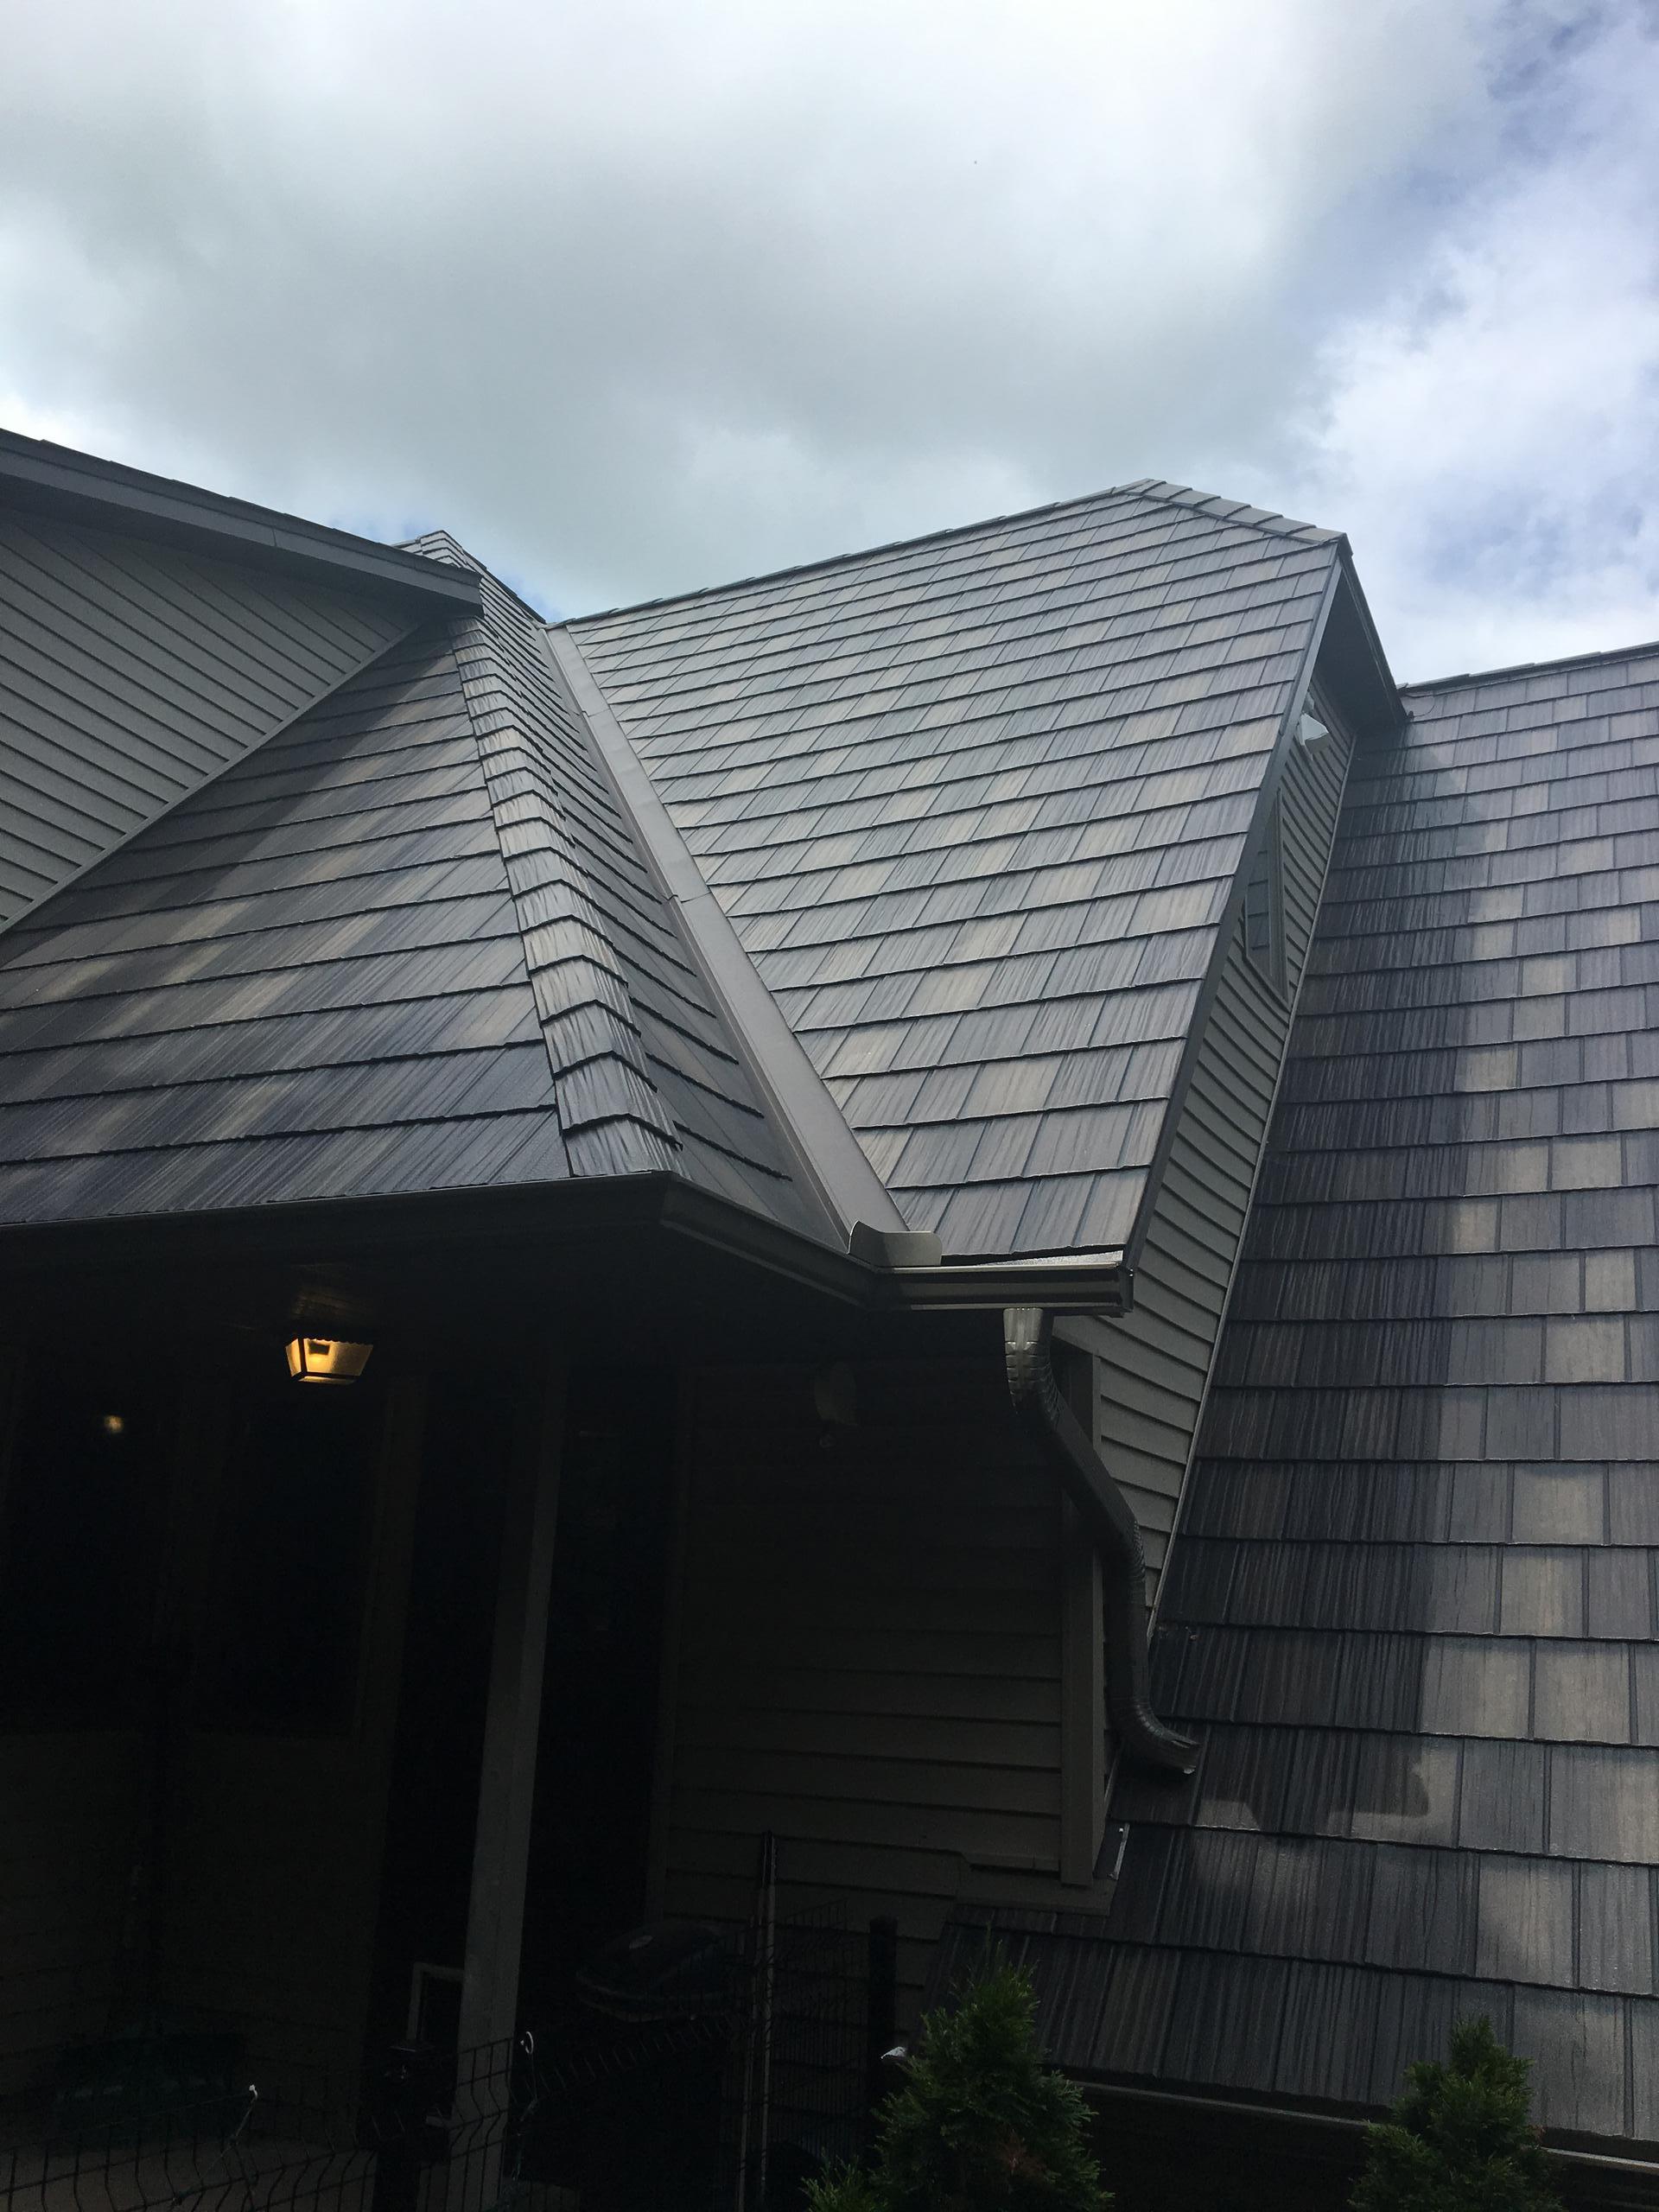 ArrowLine Statuary Bronze Enhanced Shake roofing gives this home quality and style that is everlasting.